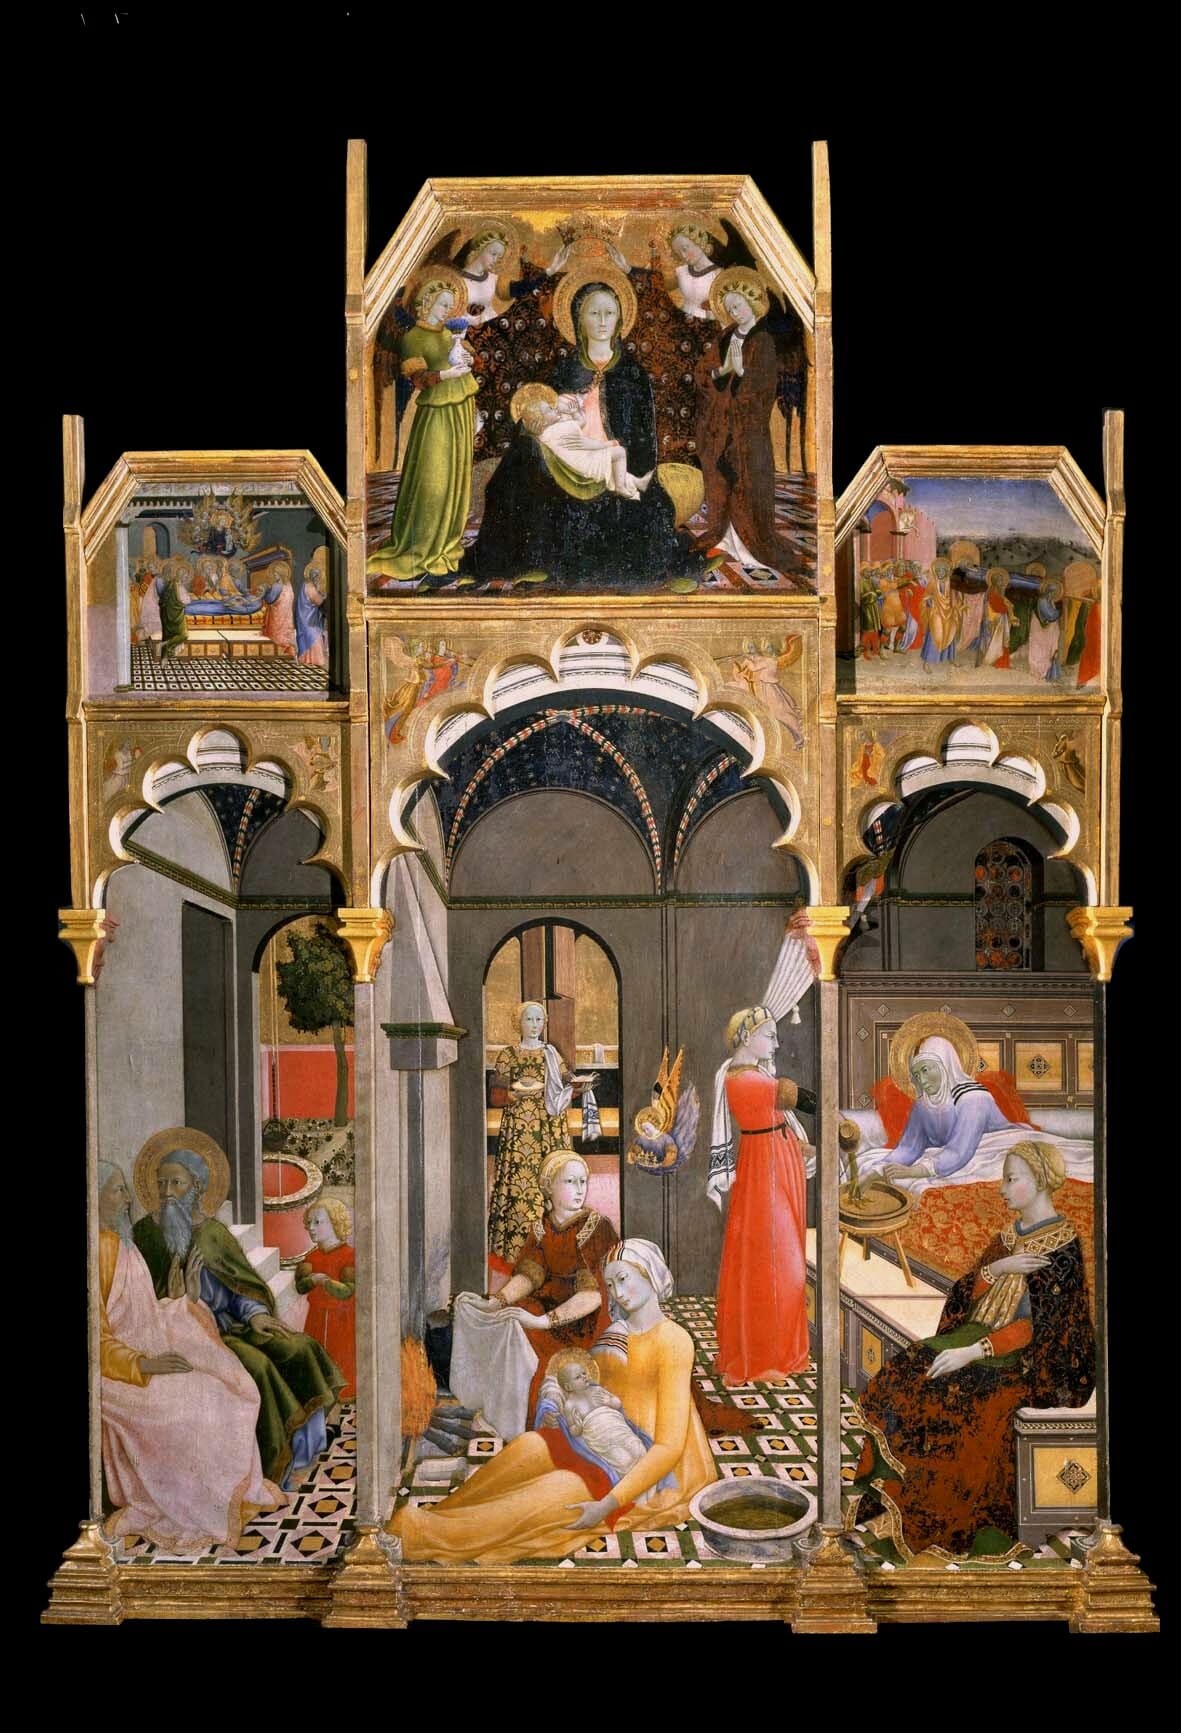 Sano di Pietro's Nativity of the Virgin | The Mary's first day